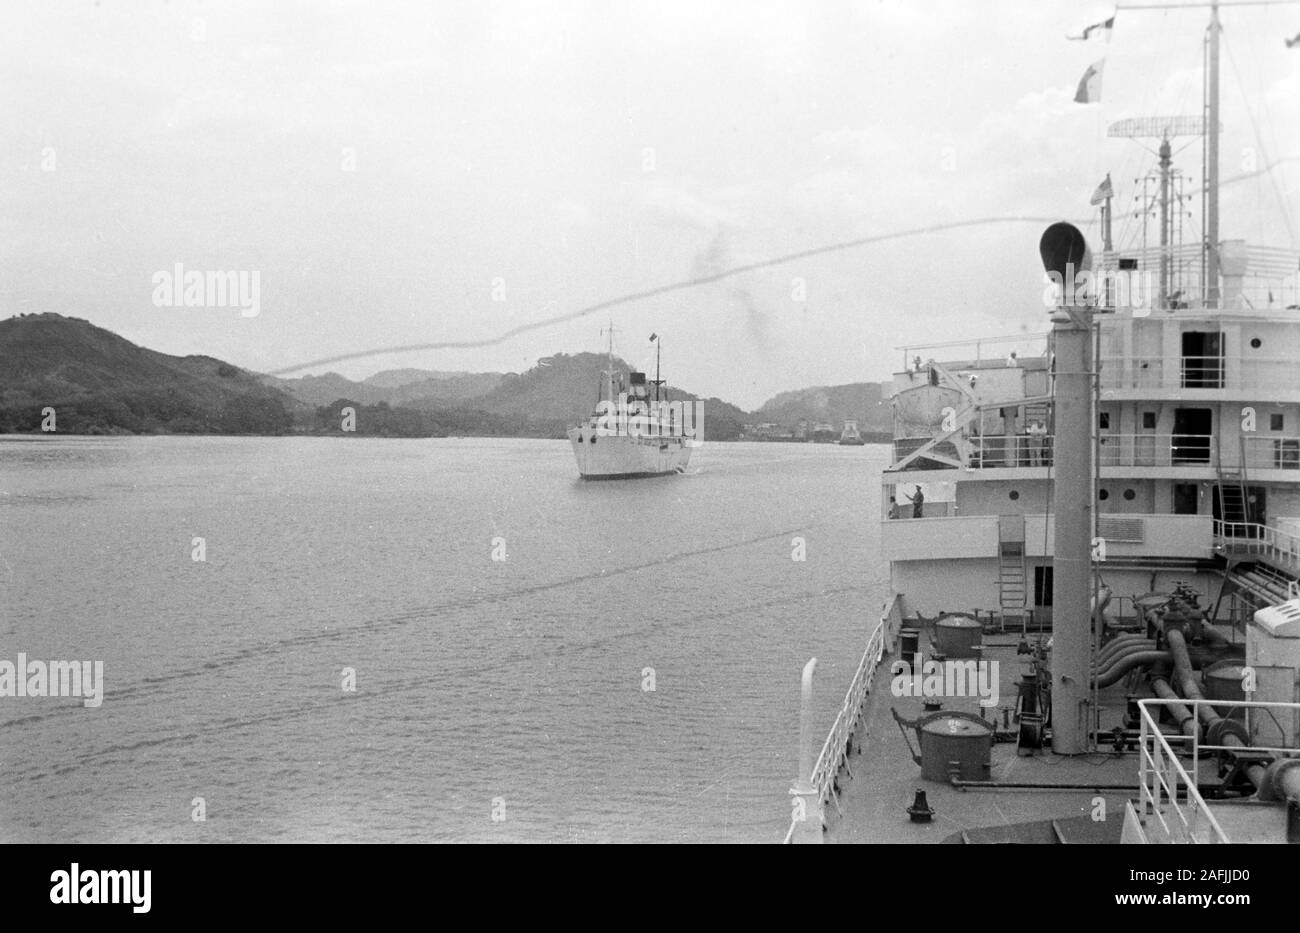 Schiffe an den Miraflores Schleusen im Zugang zum Pazifischen Ozean, nahe Panama-Stadt, Panama, 1955. Ships and vessels at the Miraflores locks of the Panama Canal with entry to the Pacific Ocean, Panama, 1955. Stock Photo